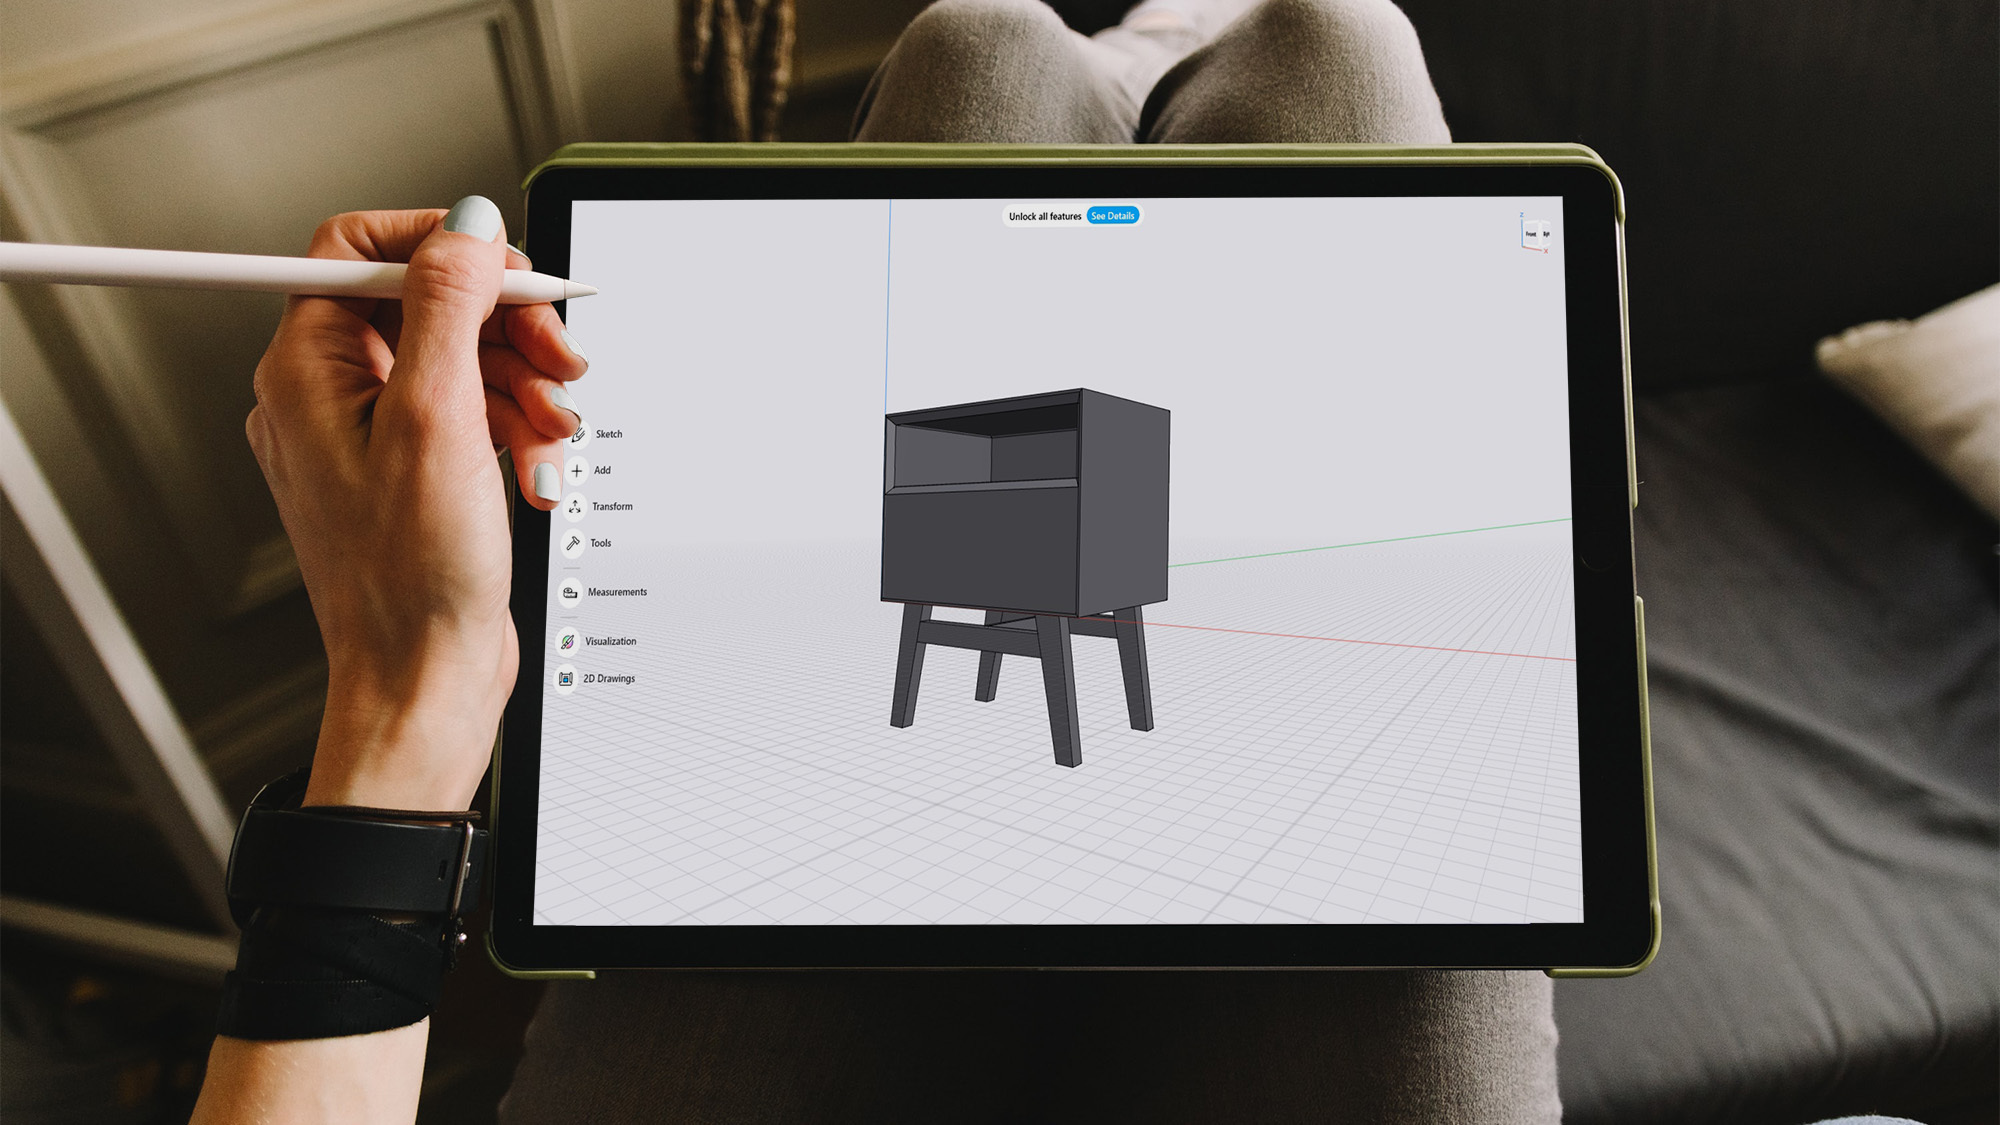 Shapr3D can make woodworking easier—here are 5 tips to get started